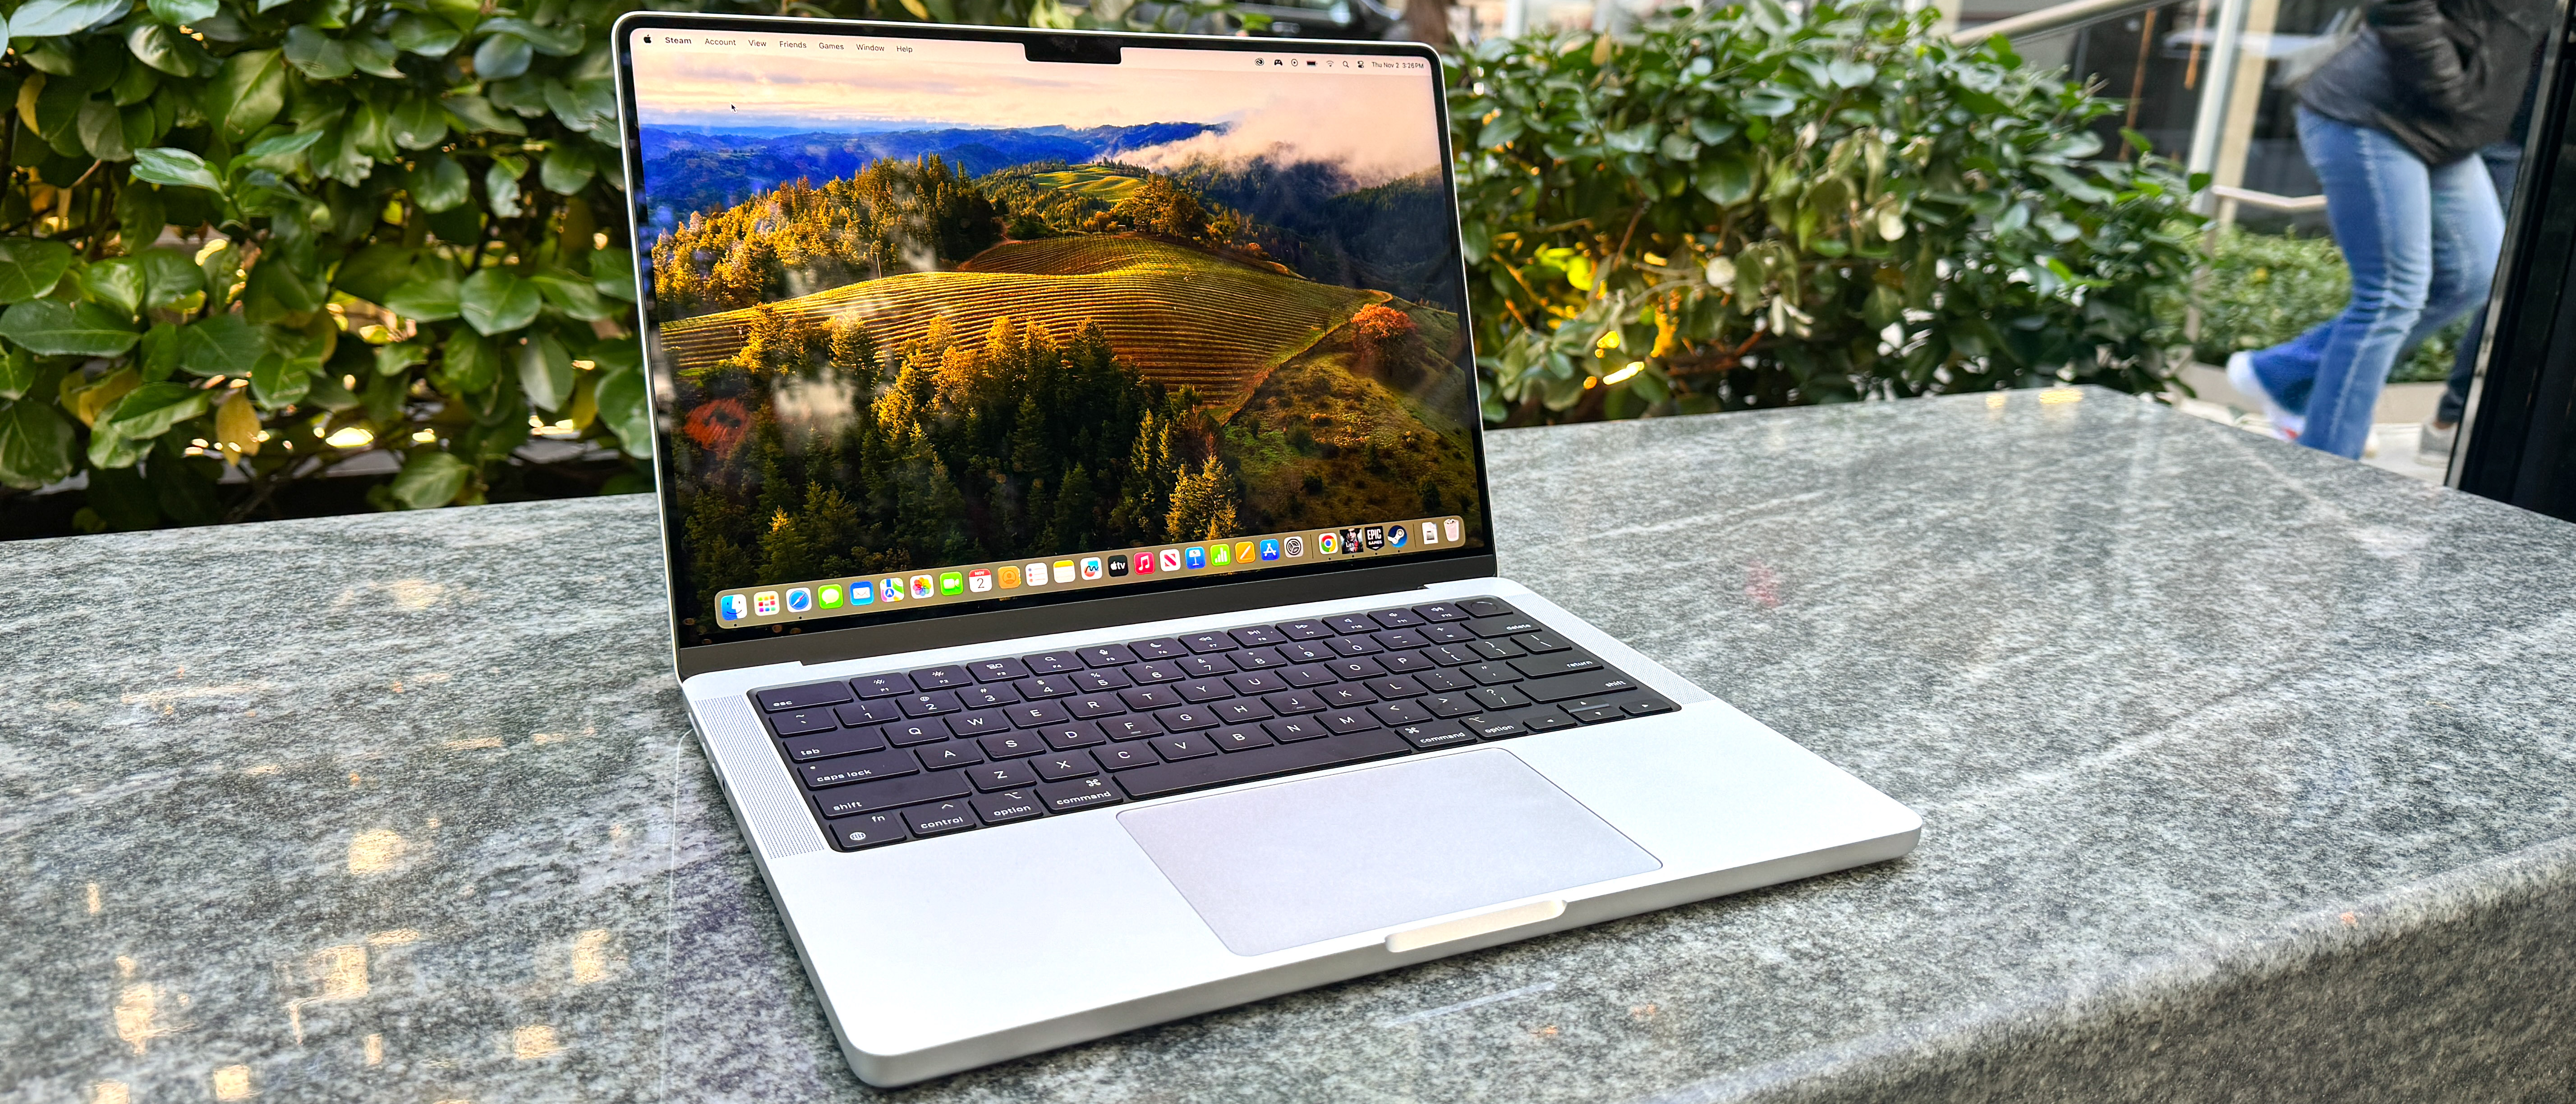 Apple MacBook Pro 14-Inch (2023, M3) Review